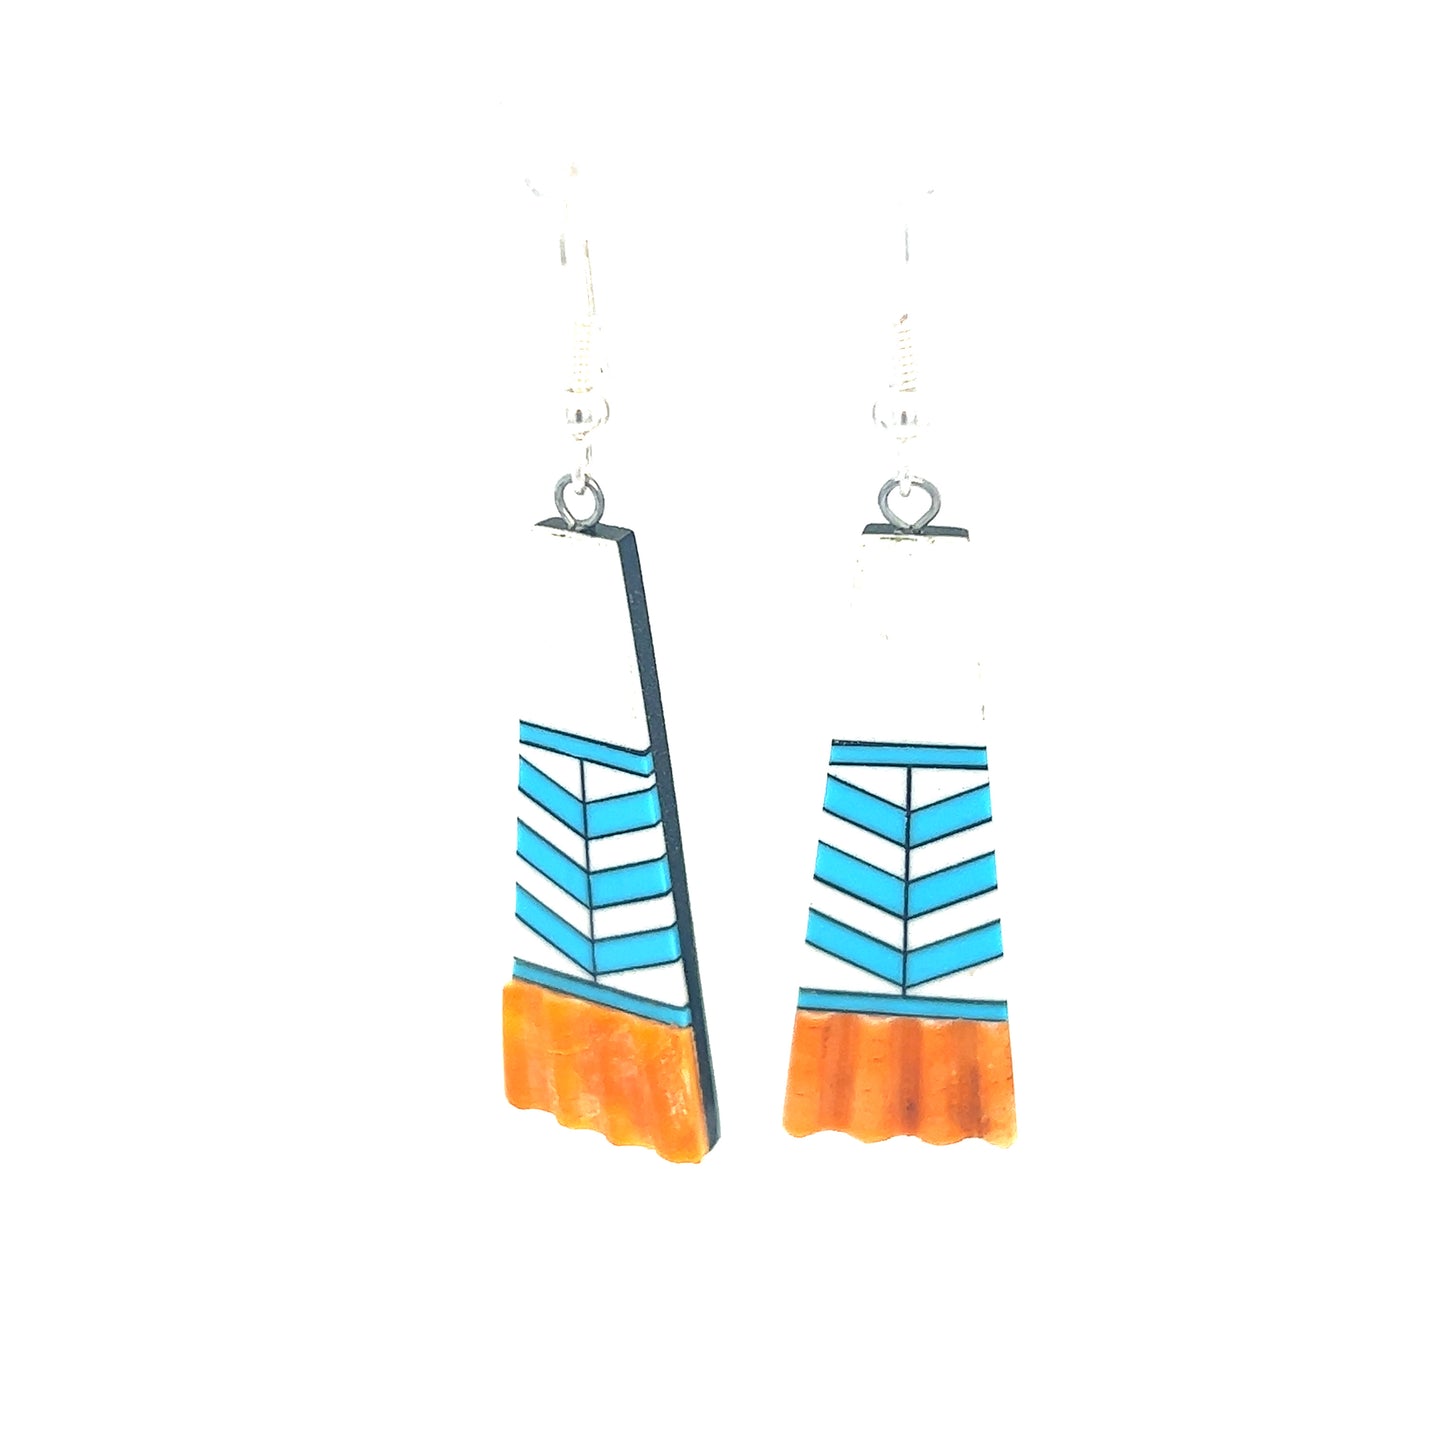 A pair of Native American Designed Inlaid Trapezoid Earrings in turquoise blue on a white background, handcrafted with spiny oyster shells by Super Silver artisans.